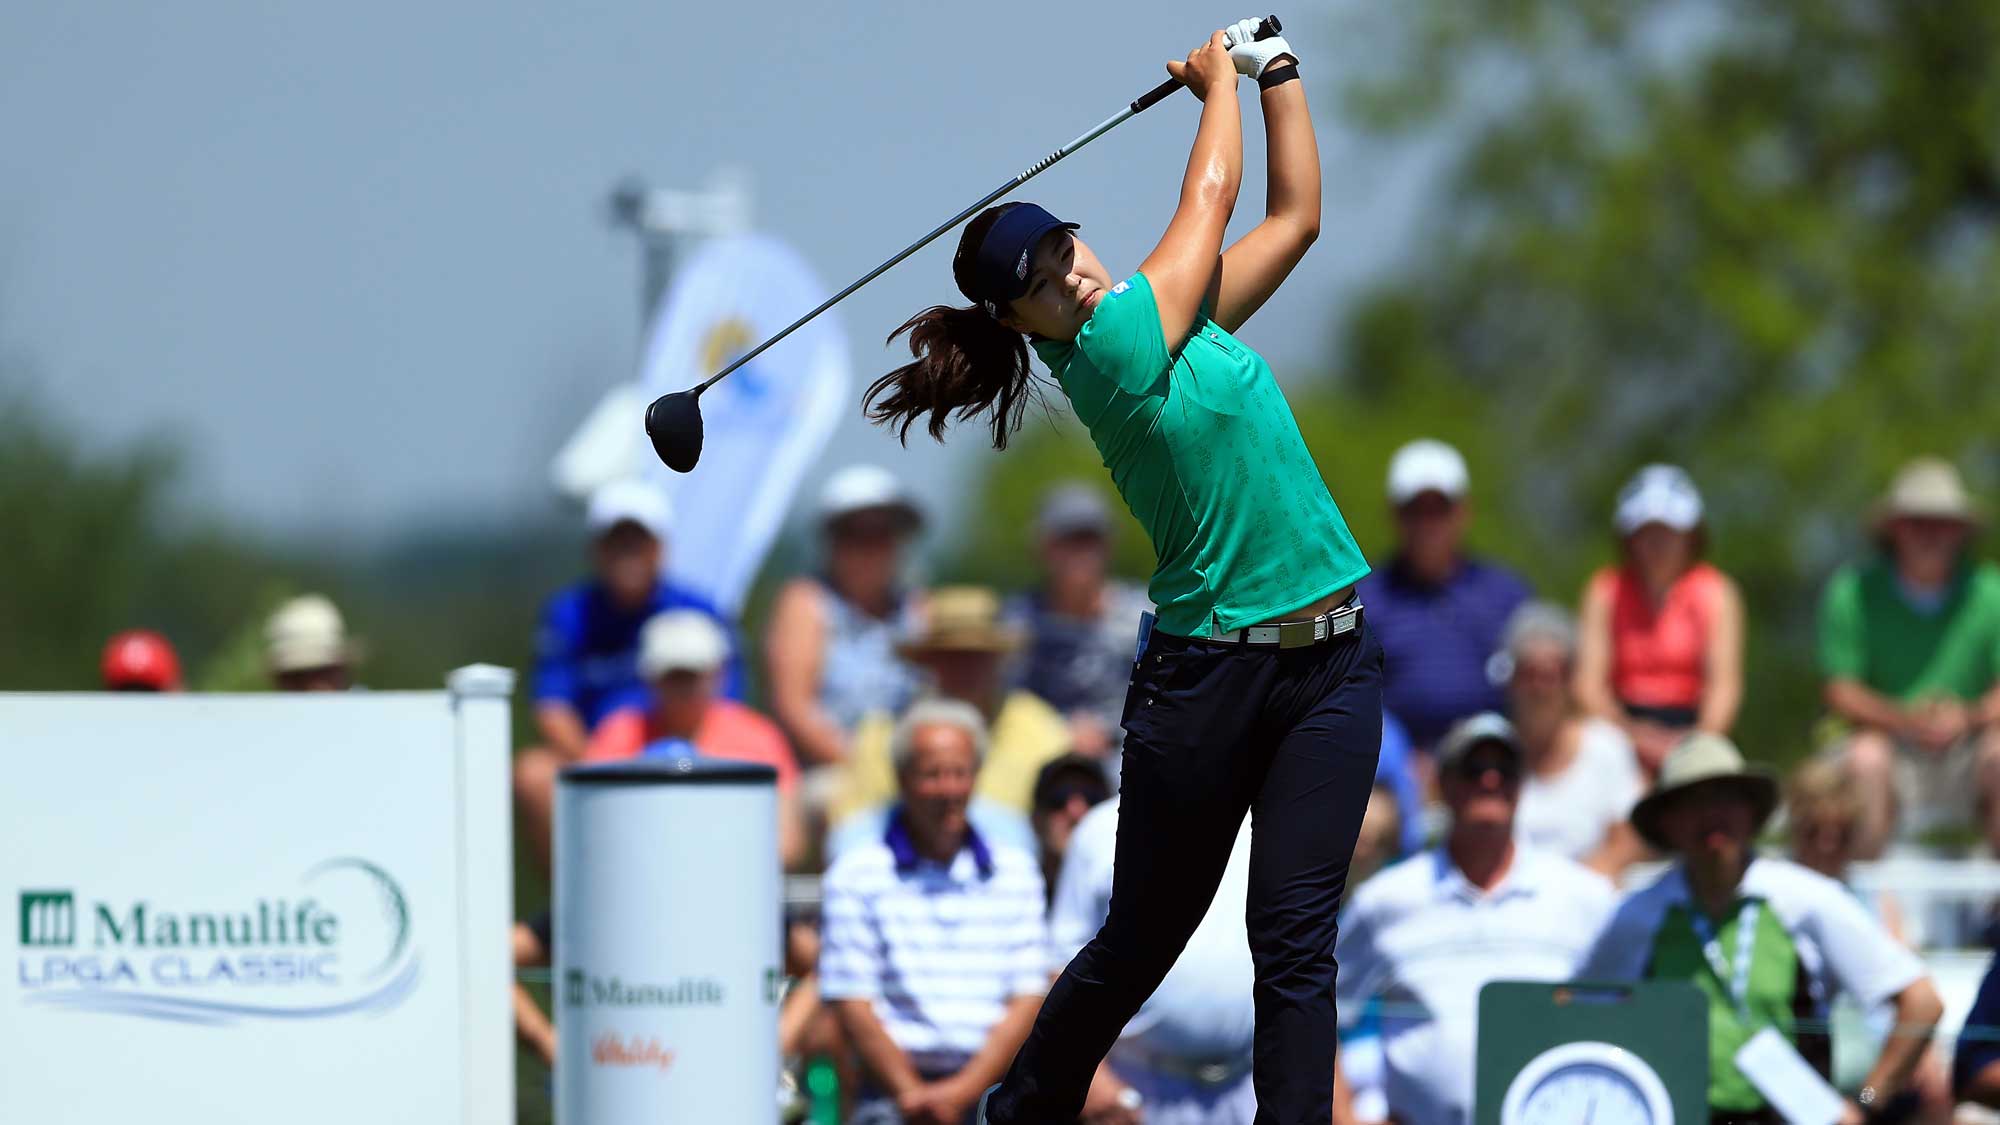 In Gee Chun of Korea hits her tee shot on the 1st hole during the third round of the Manulife LPGA Classic